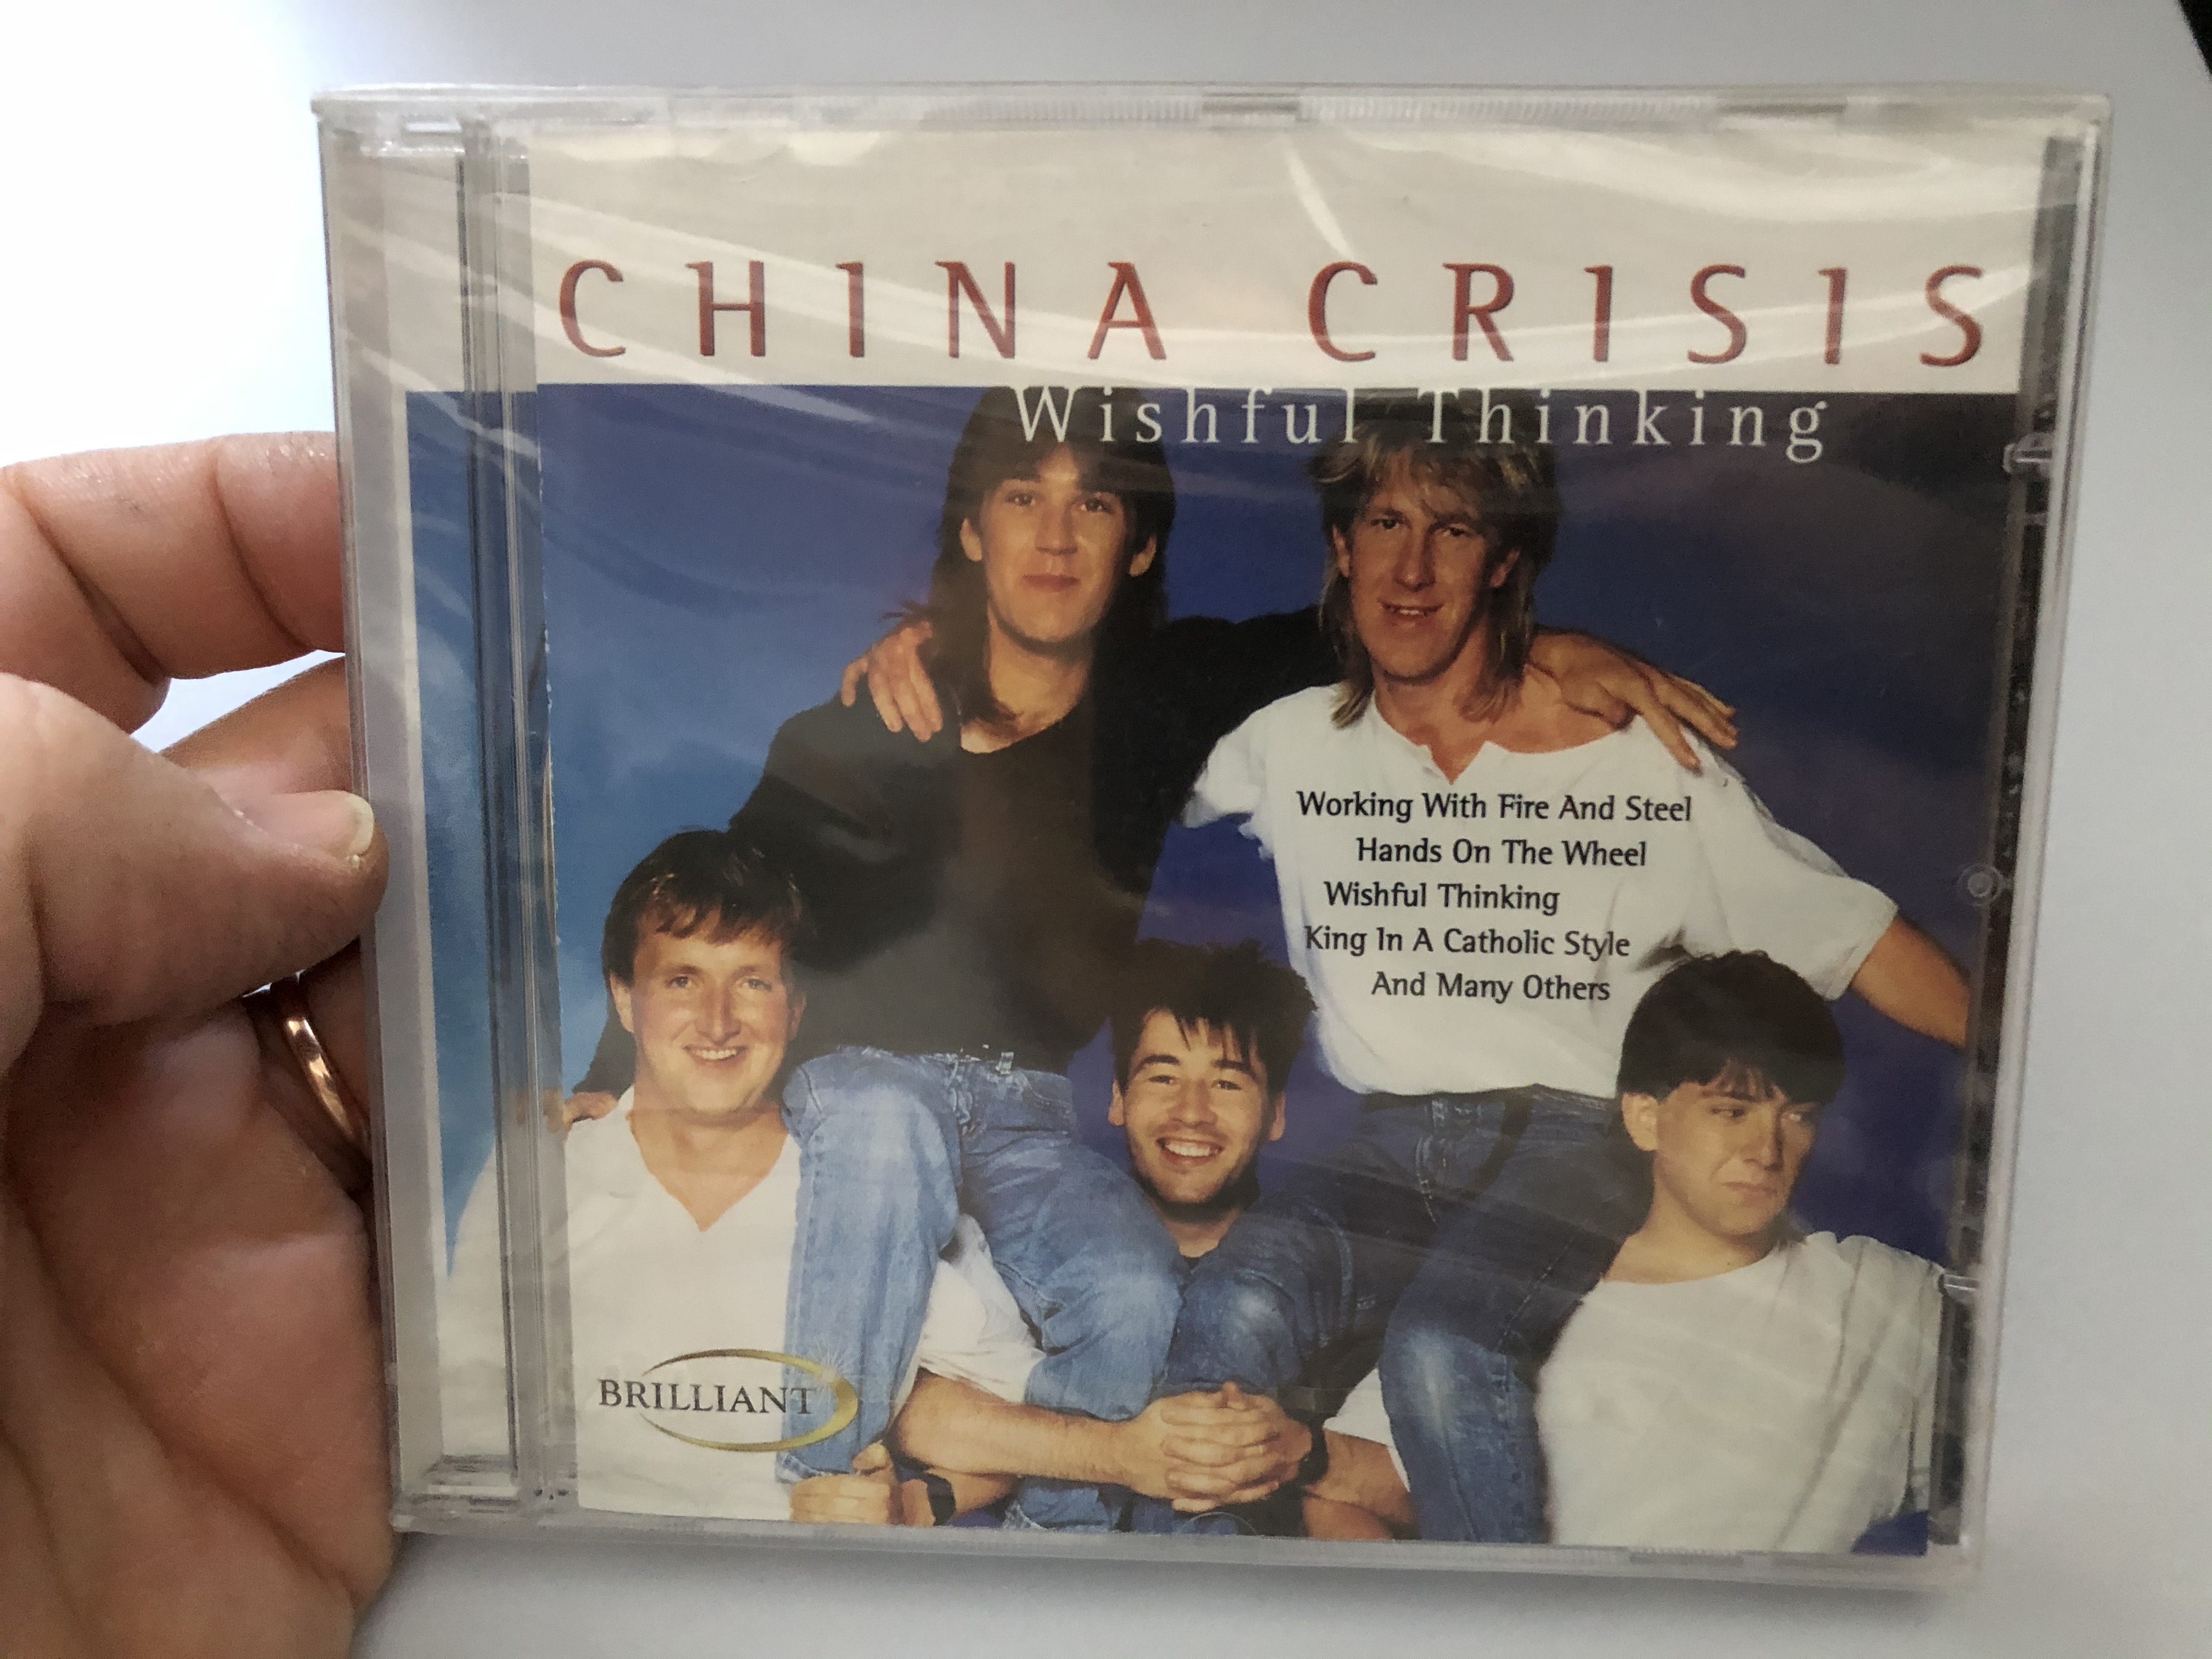 china-crisis-wishful-thinking-working-with-fire-and-steel-hands-on-the-wheel-whishful-thinking-king-in-a-catholic-style-and-many-others-brilliant-audio-cd-1999-bt-33043-1-.jpg